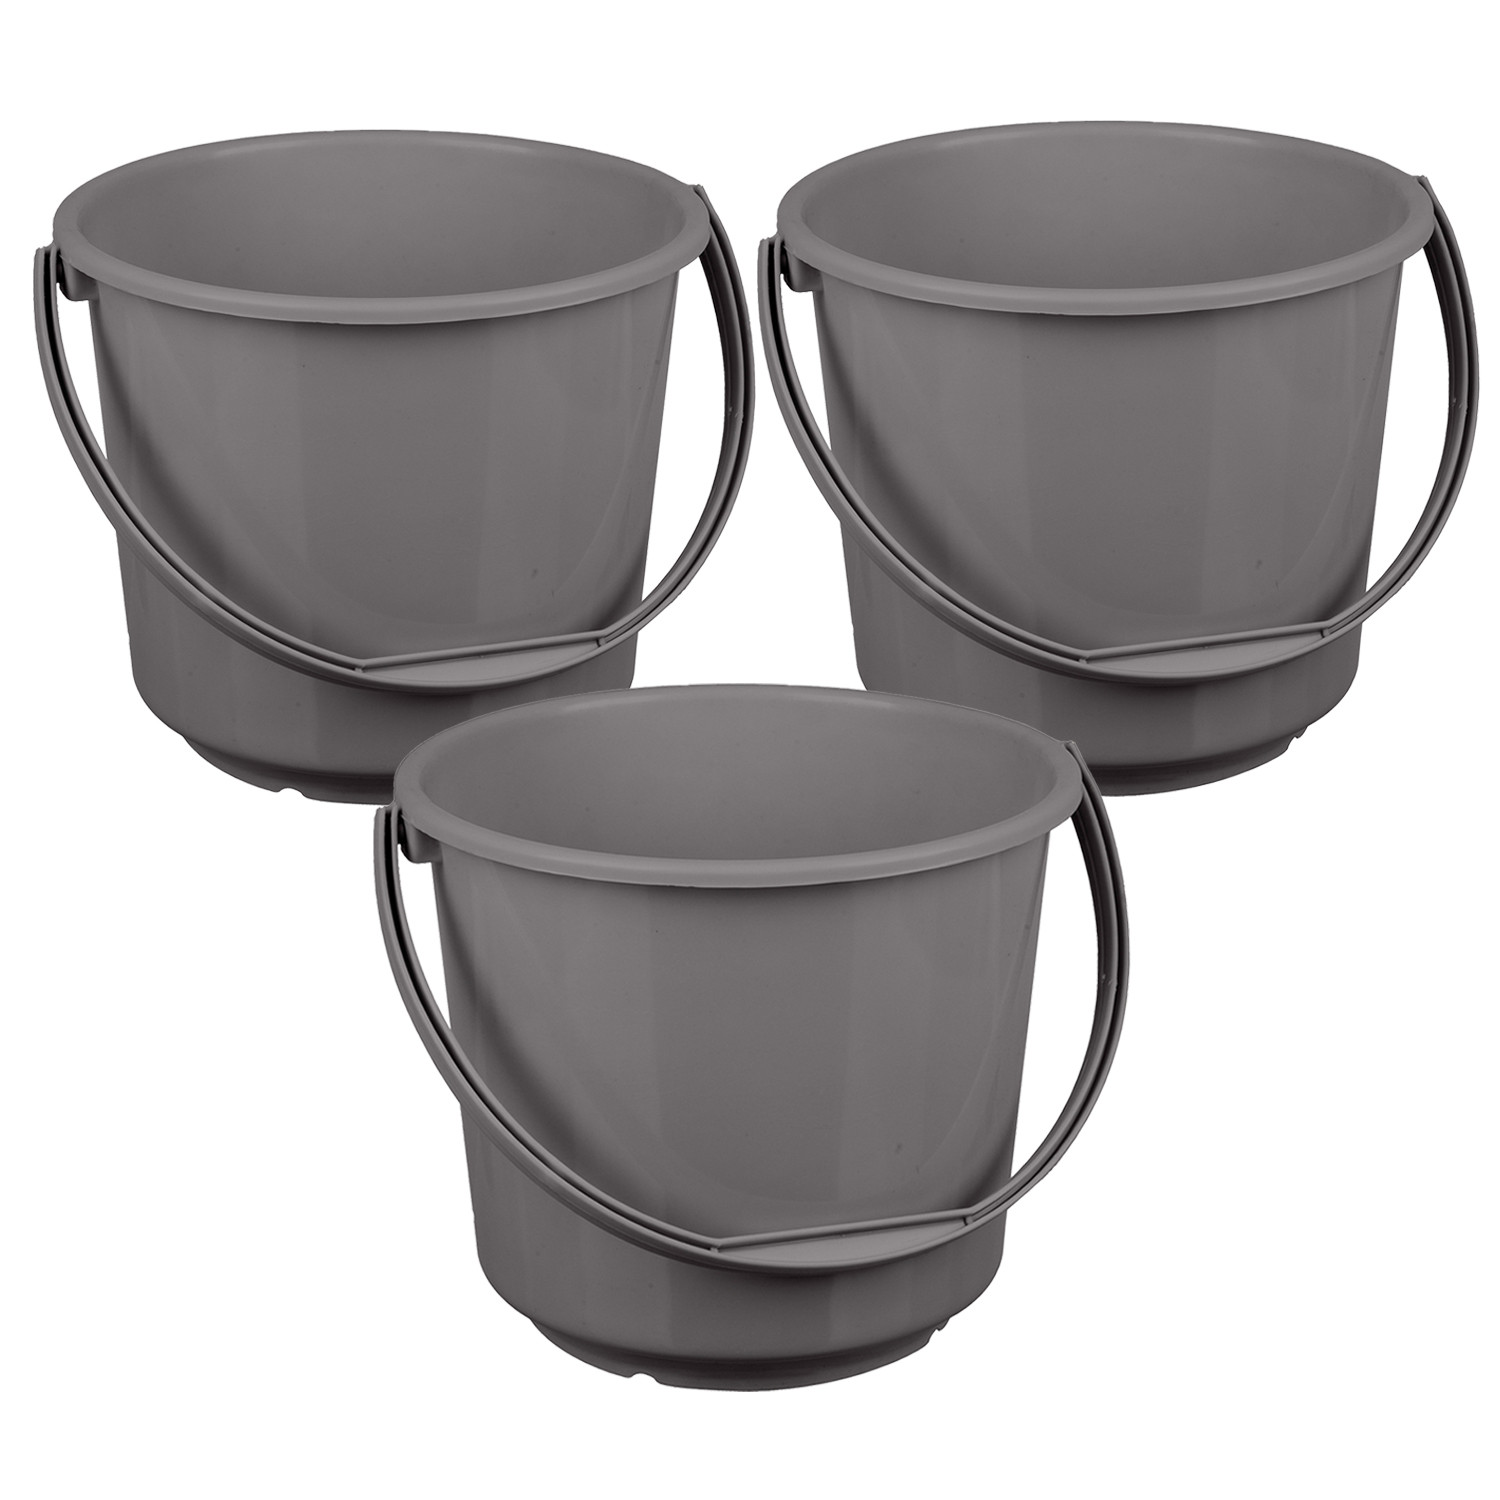 Kuber Industries Bucket | Plastic Bucket for Mopping | Bucket for Cleaning | Storage Container Bucket | Water Storage Bucket | Bathroom Bucket | Plain Bucket | 5 LTR | Gray